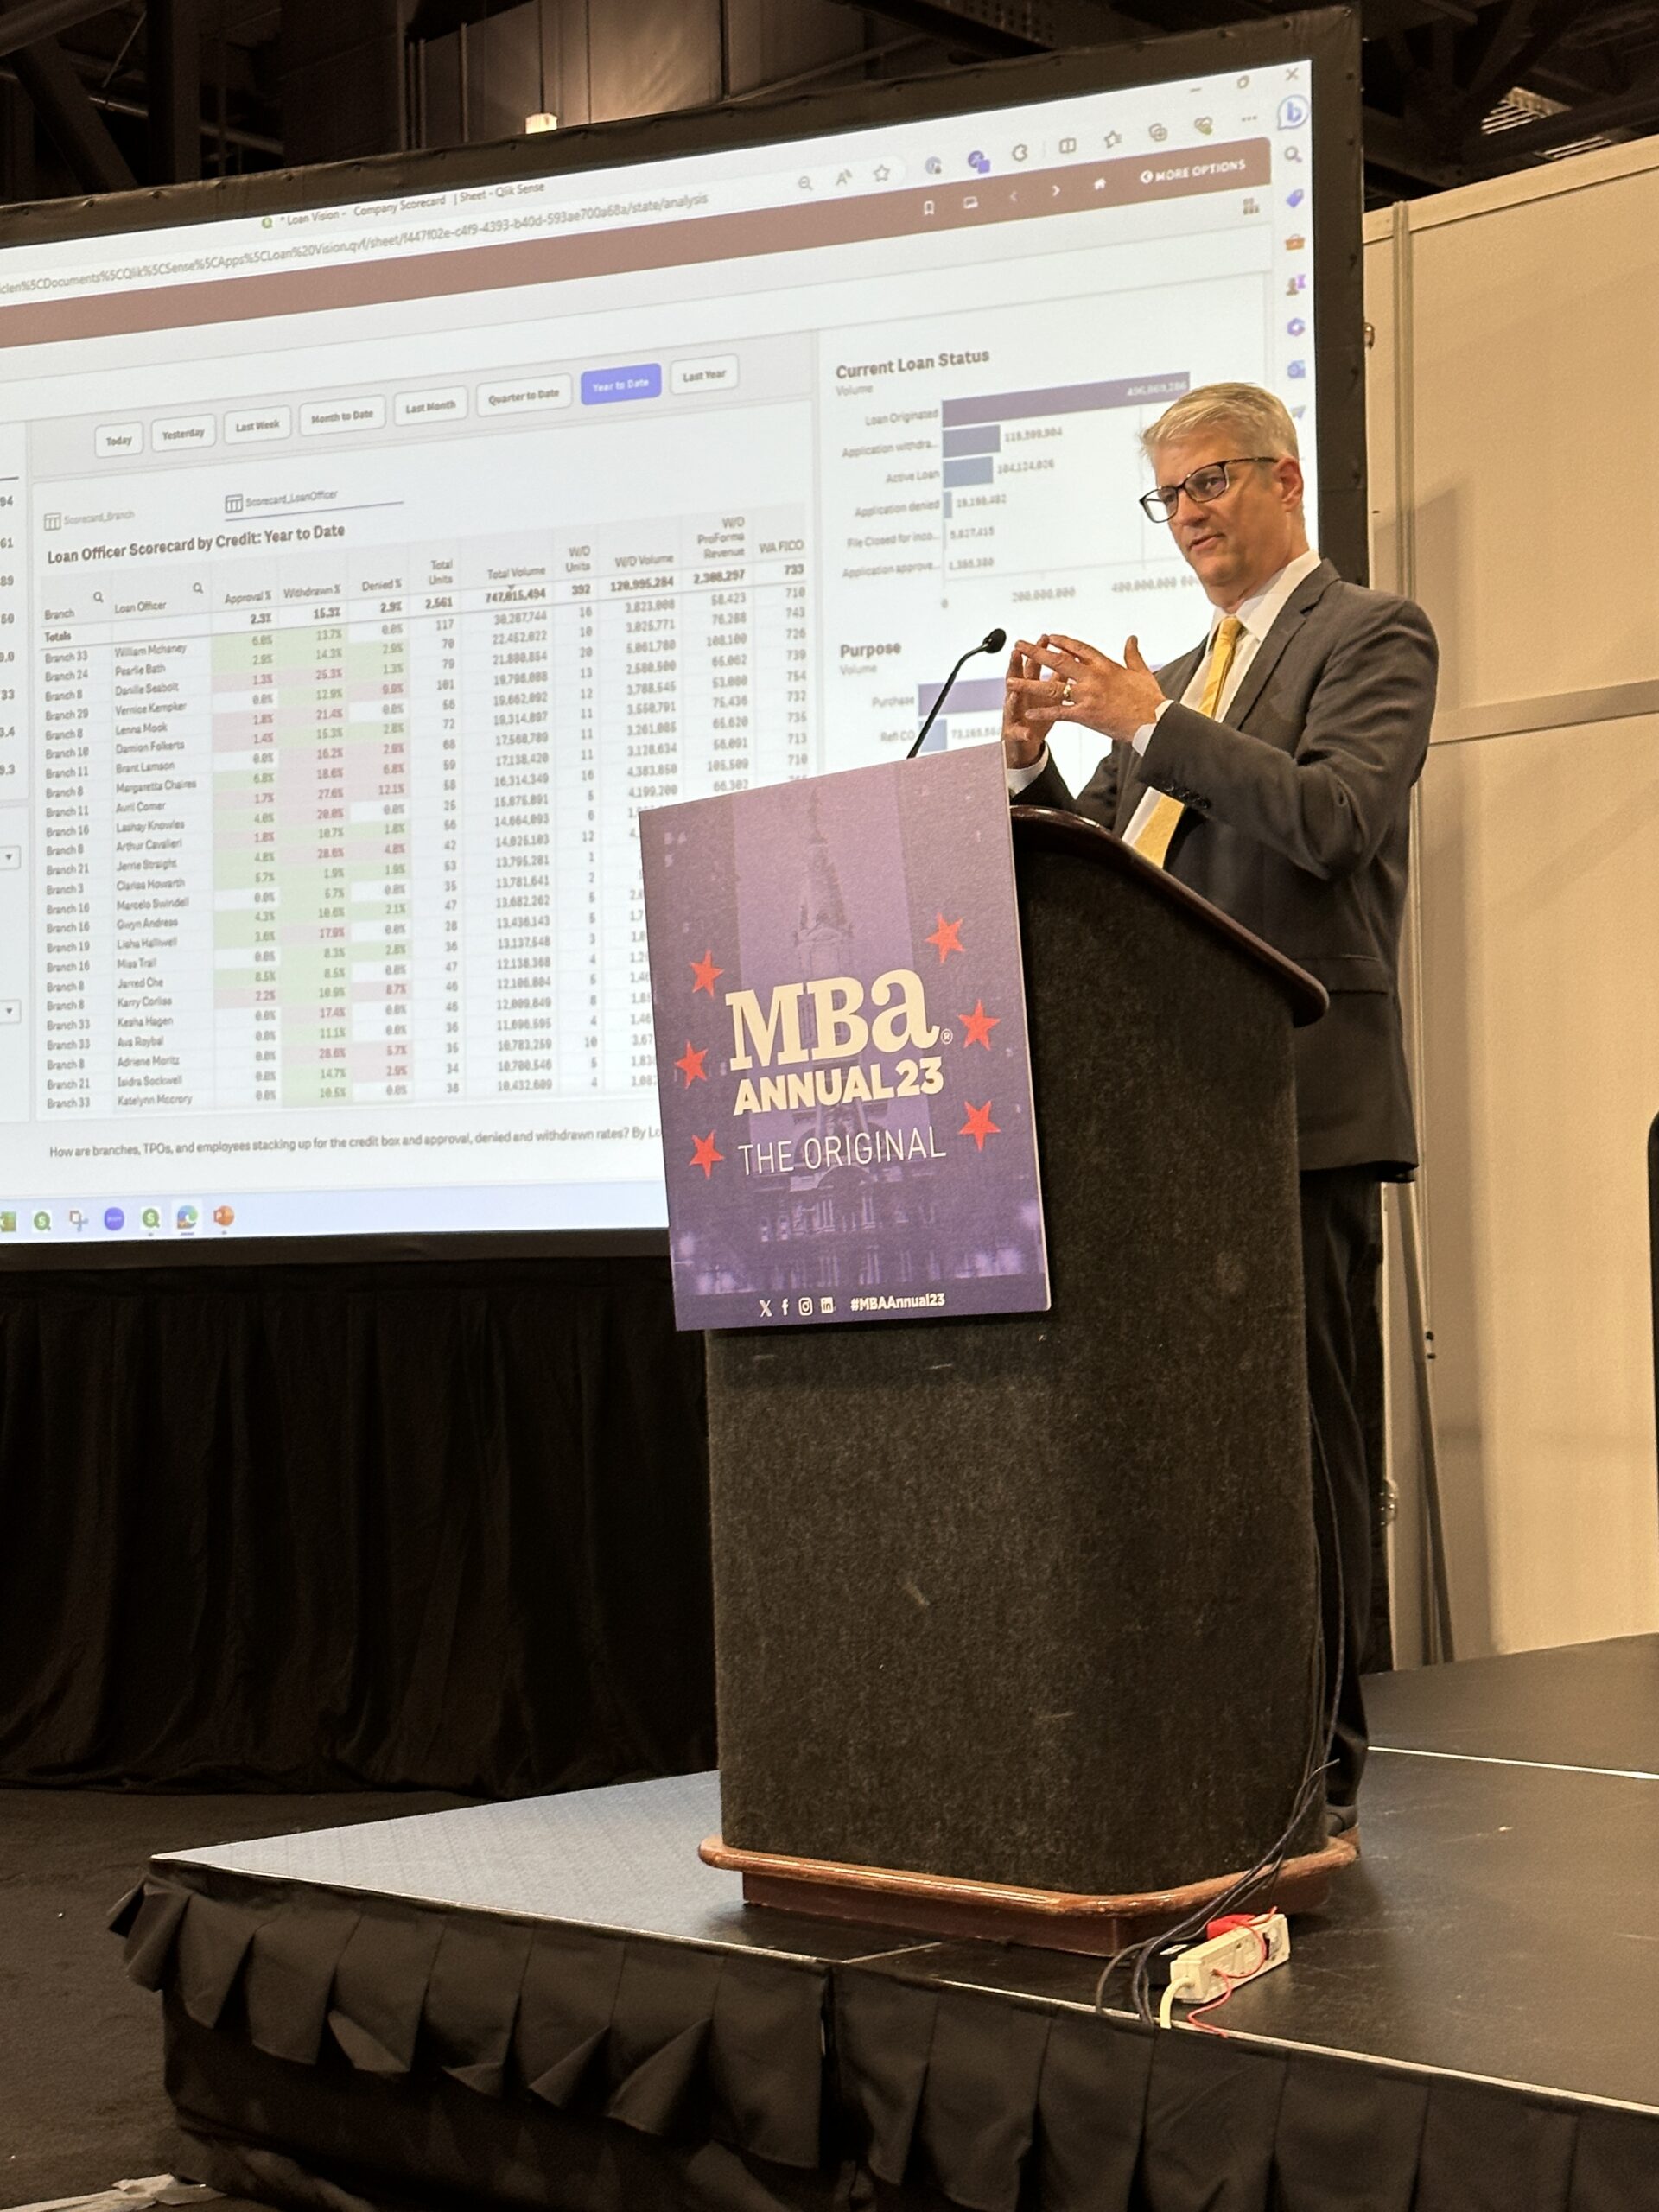 Teraverde Paul Van Siclen Live Demo Loan Vision at Mortgage Technology Showcase, MBA Annual 2023 - The Basis Point